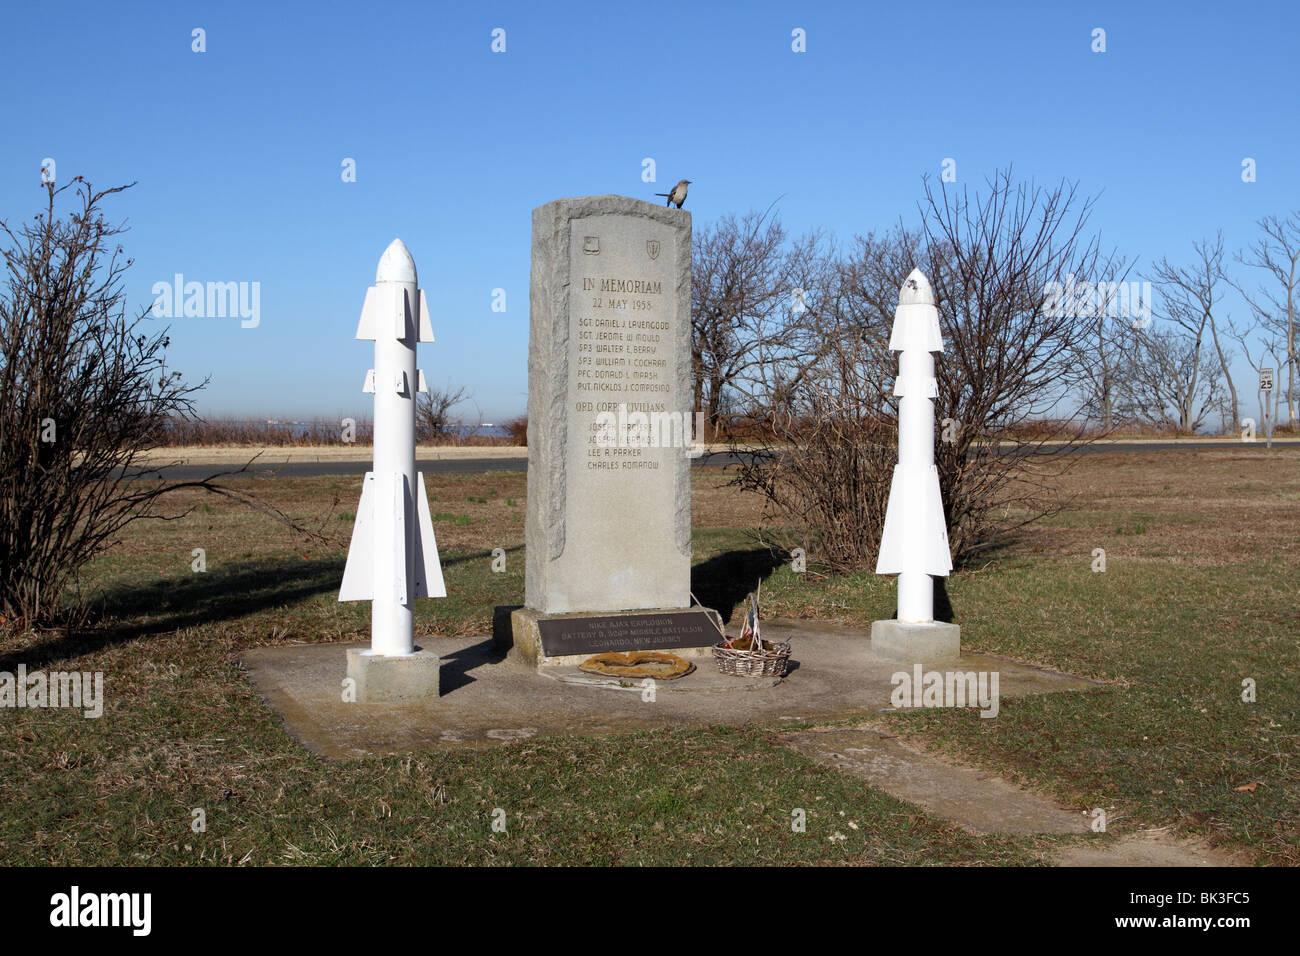 Memorial to Nike missile explosion, Fort Hancock, Sandy Hook, Gateway National Recreation Area Stock Photo